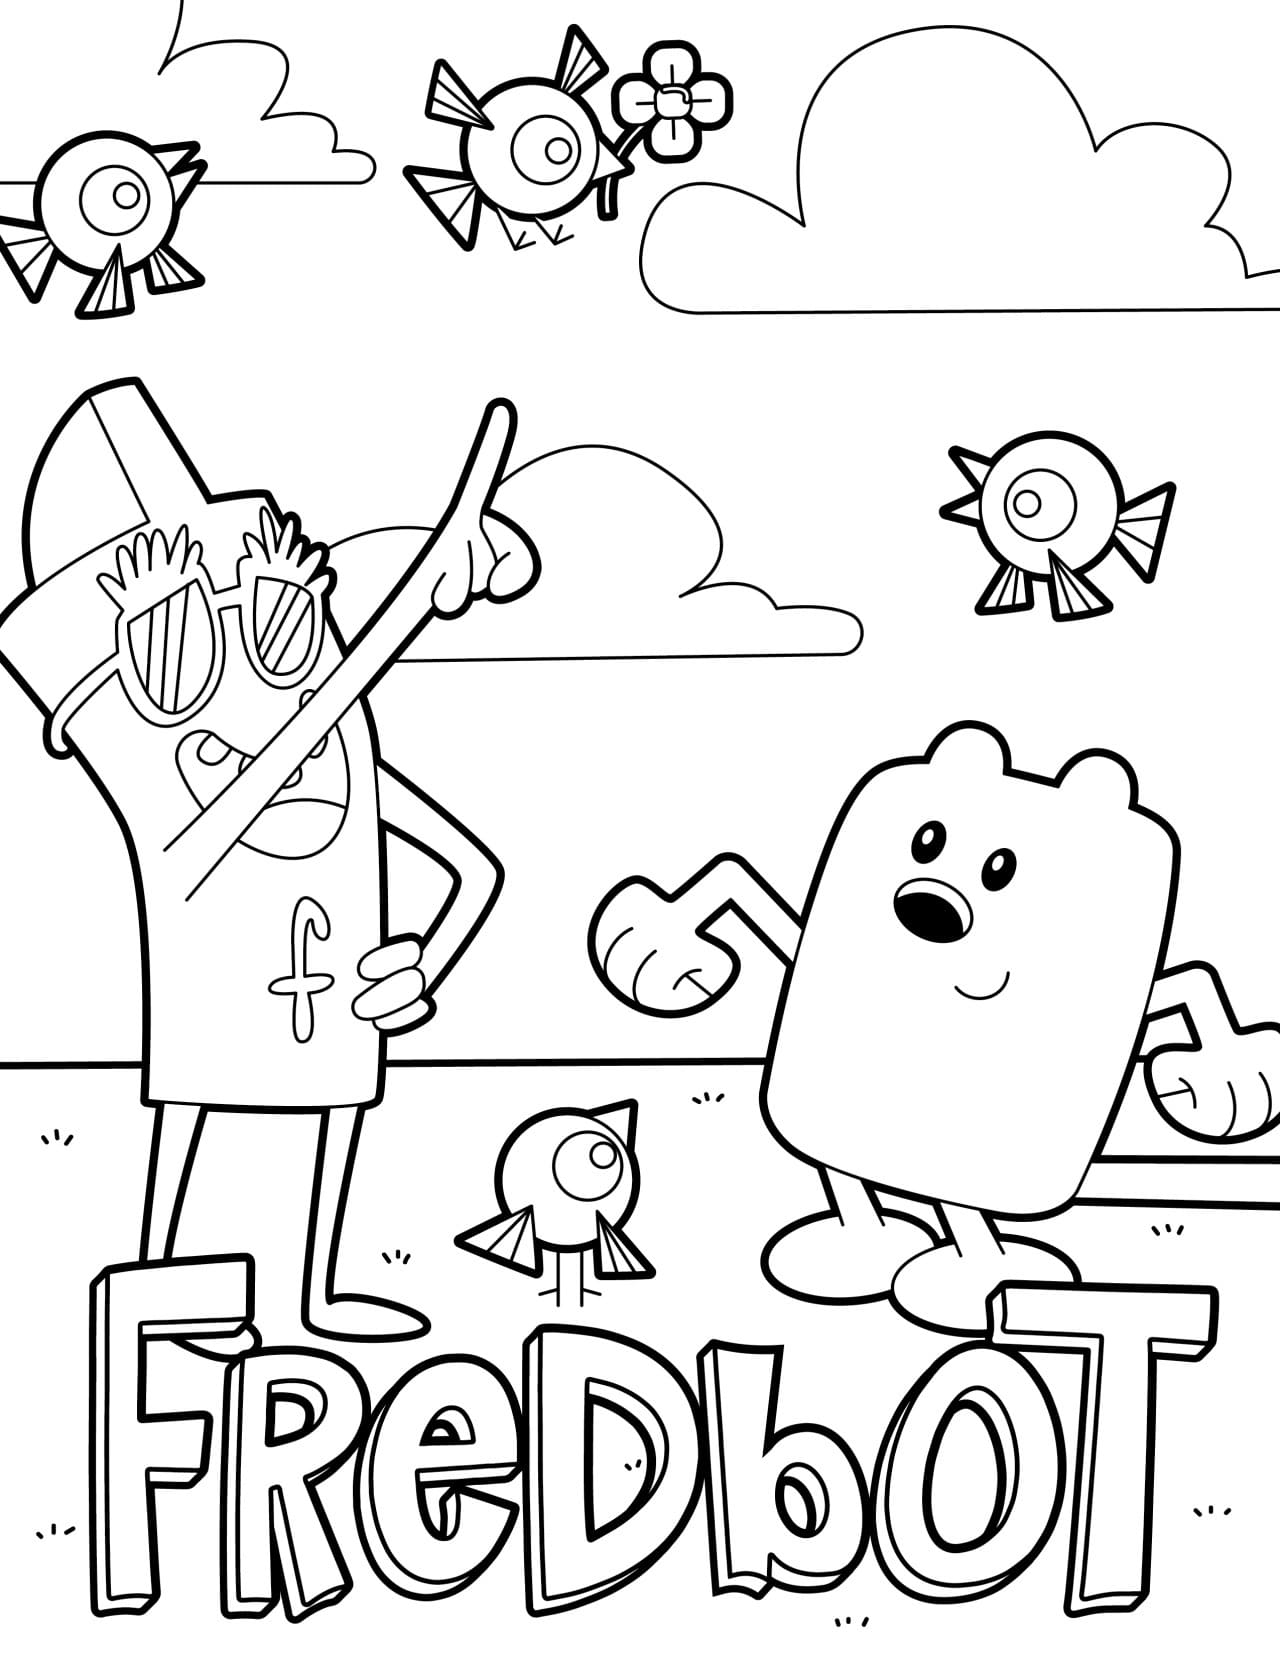 Free Wow Wow Wubbzy Coloring Pages Fredbot printable